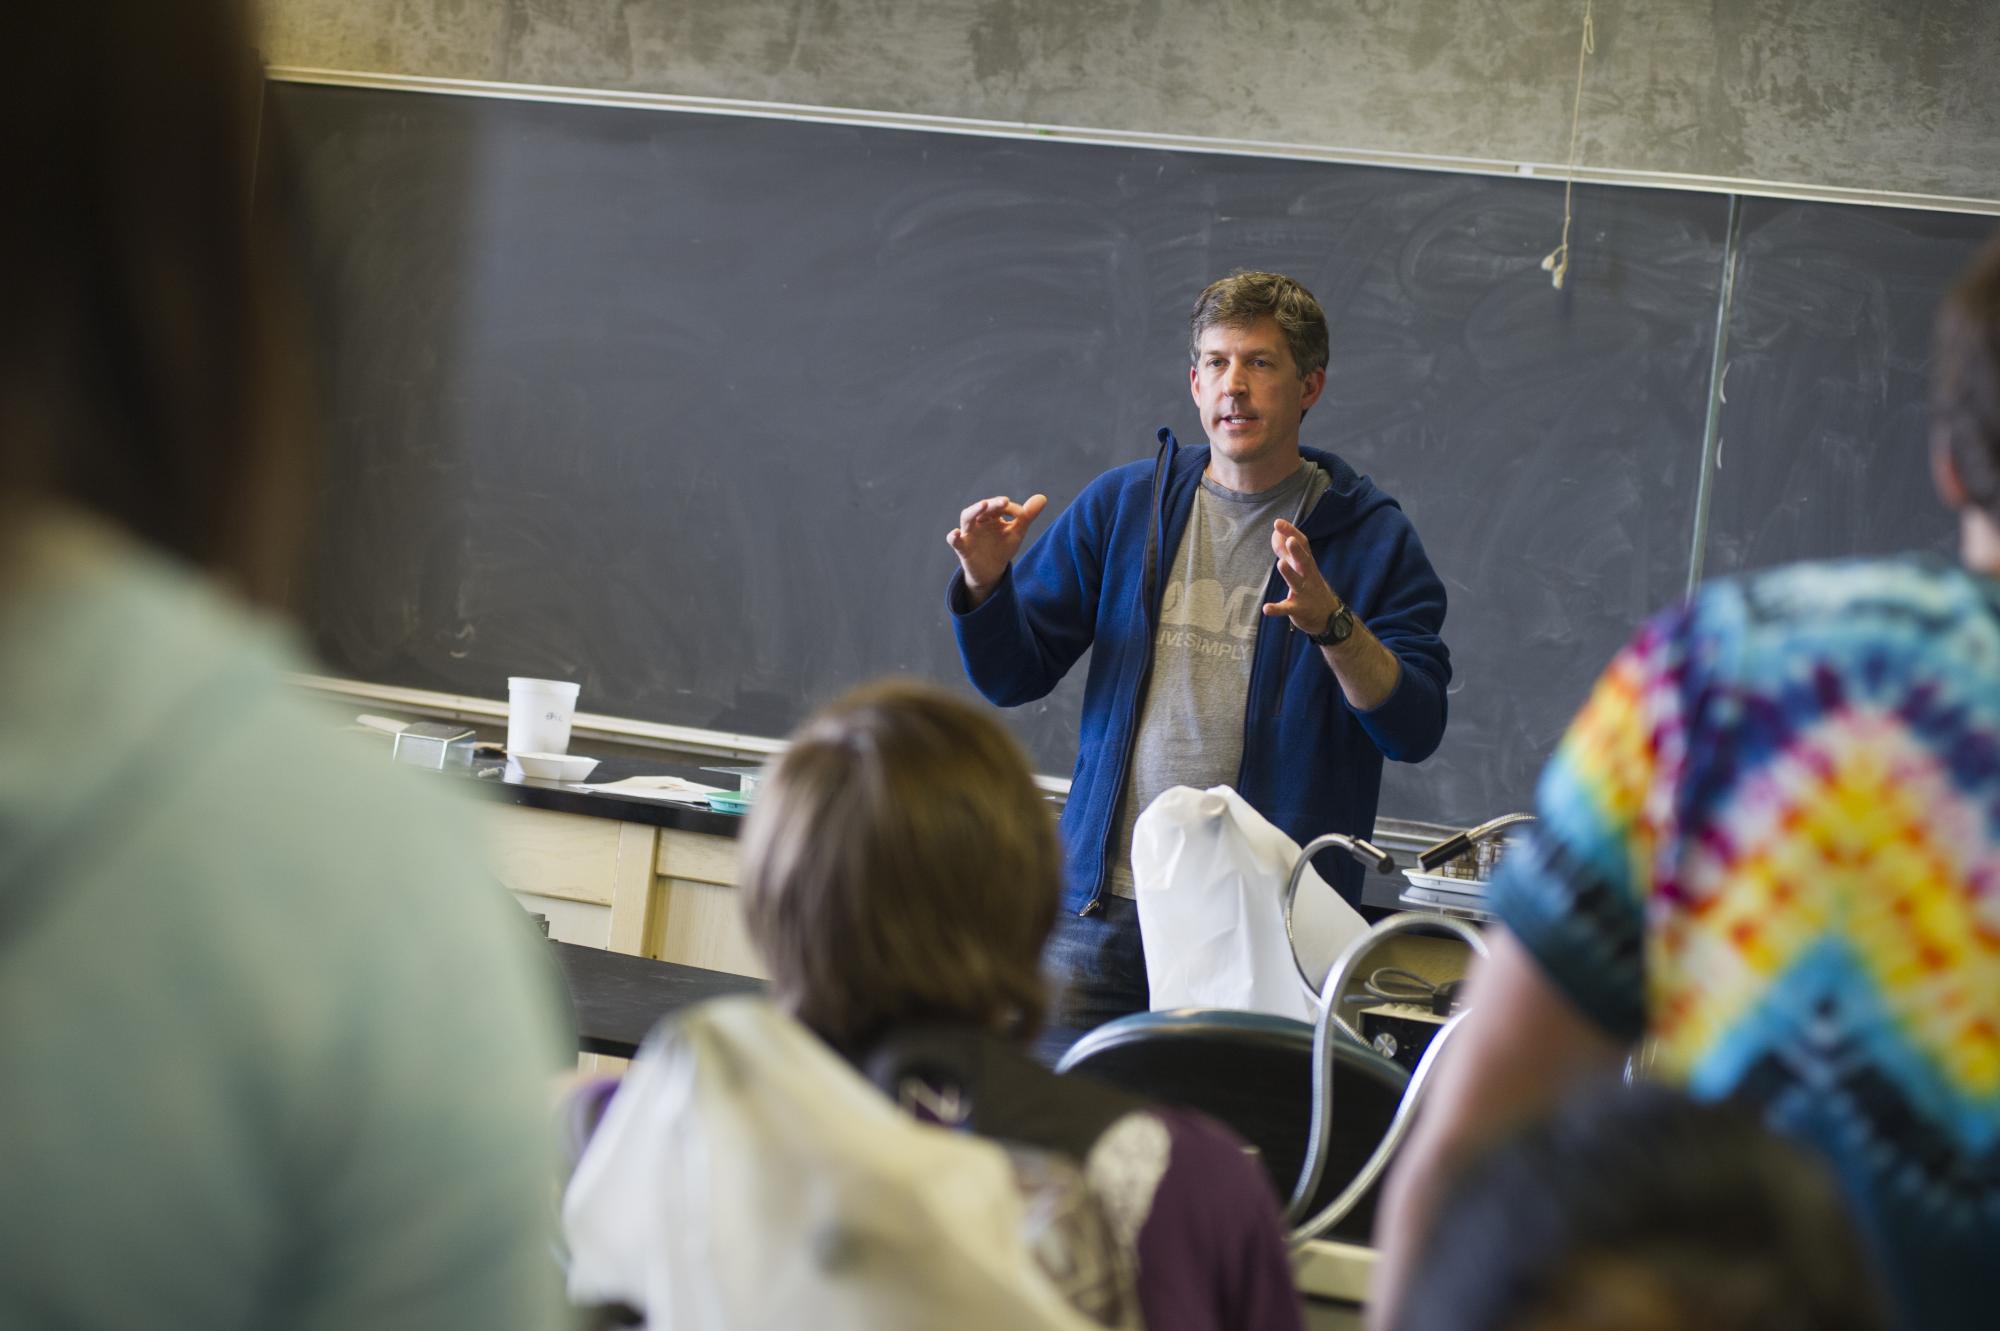 A professor lectures in a classroom